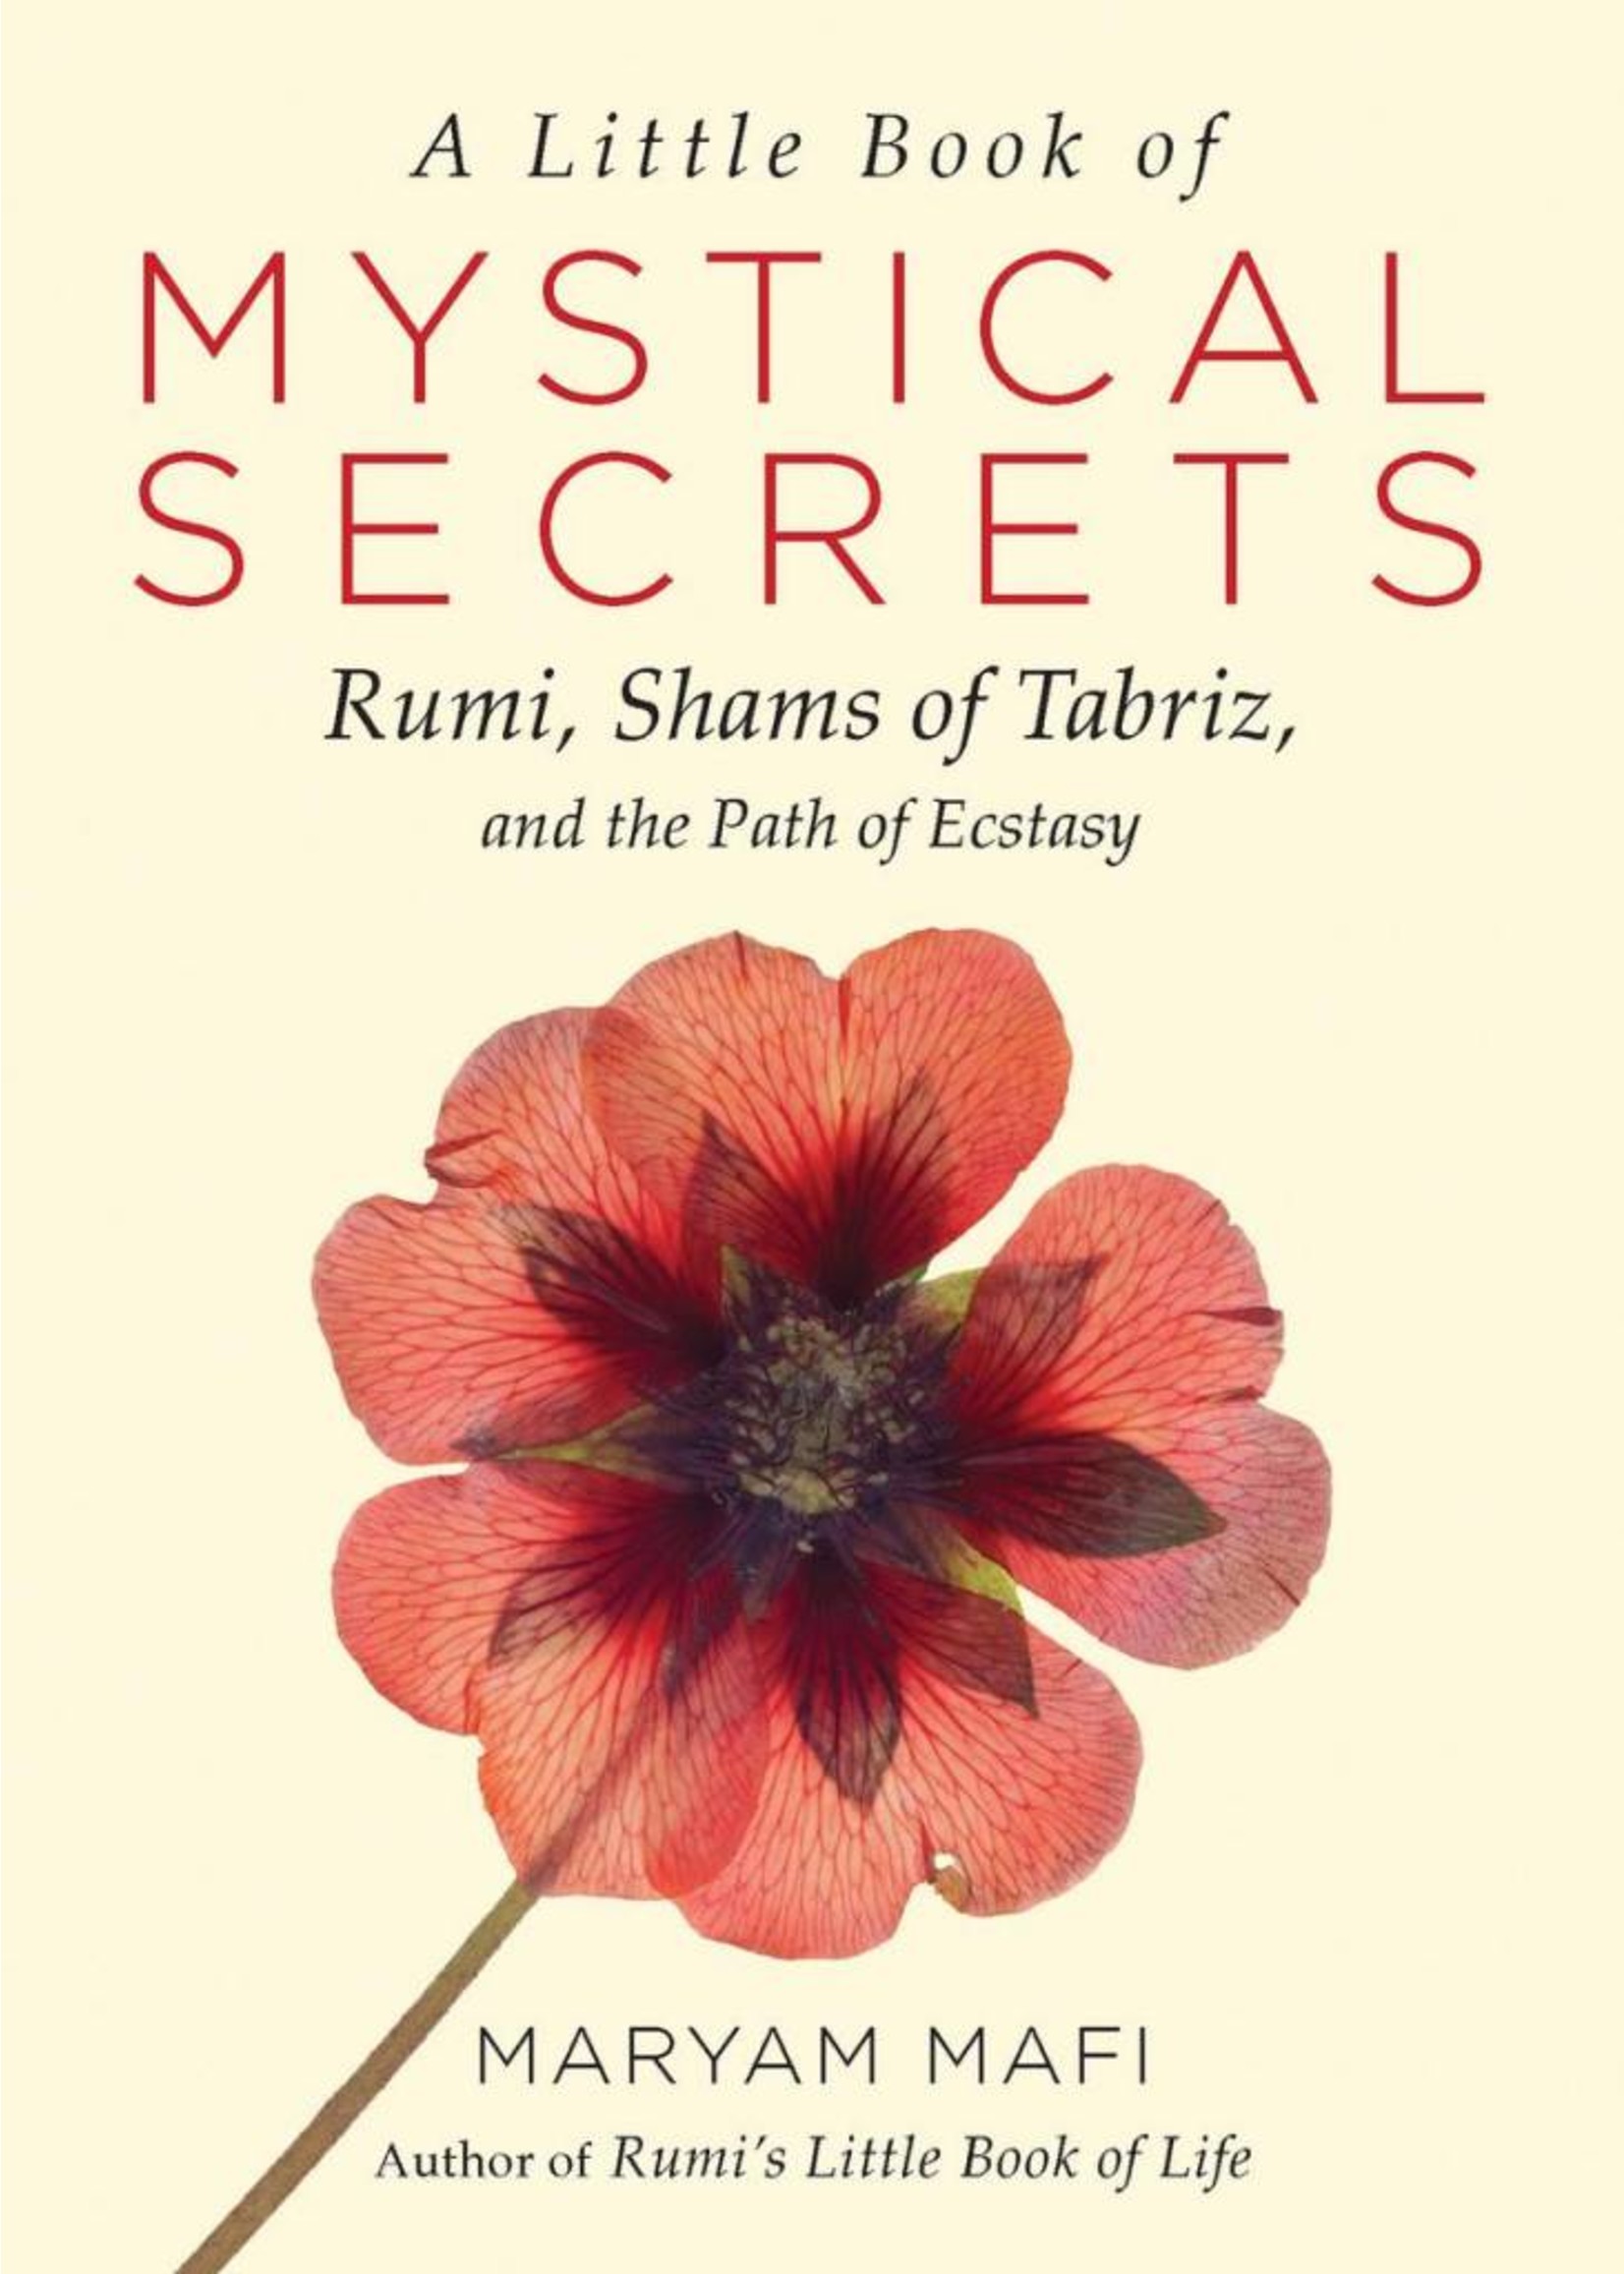 A Little Book of Mystical Secrets | Rumi, Shams of Tabriz, and the Path of Ecstasy